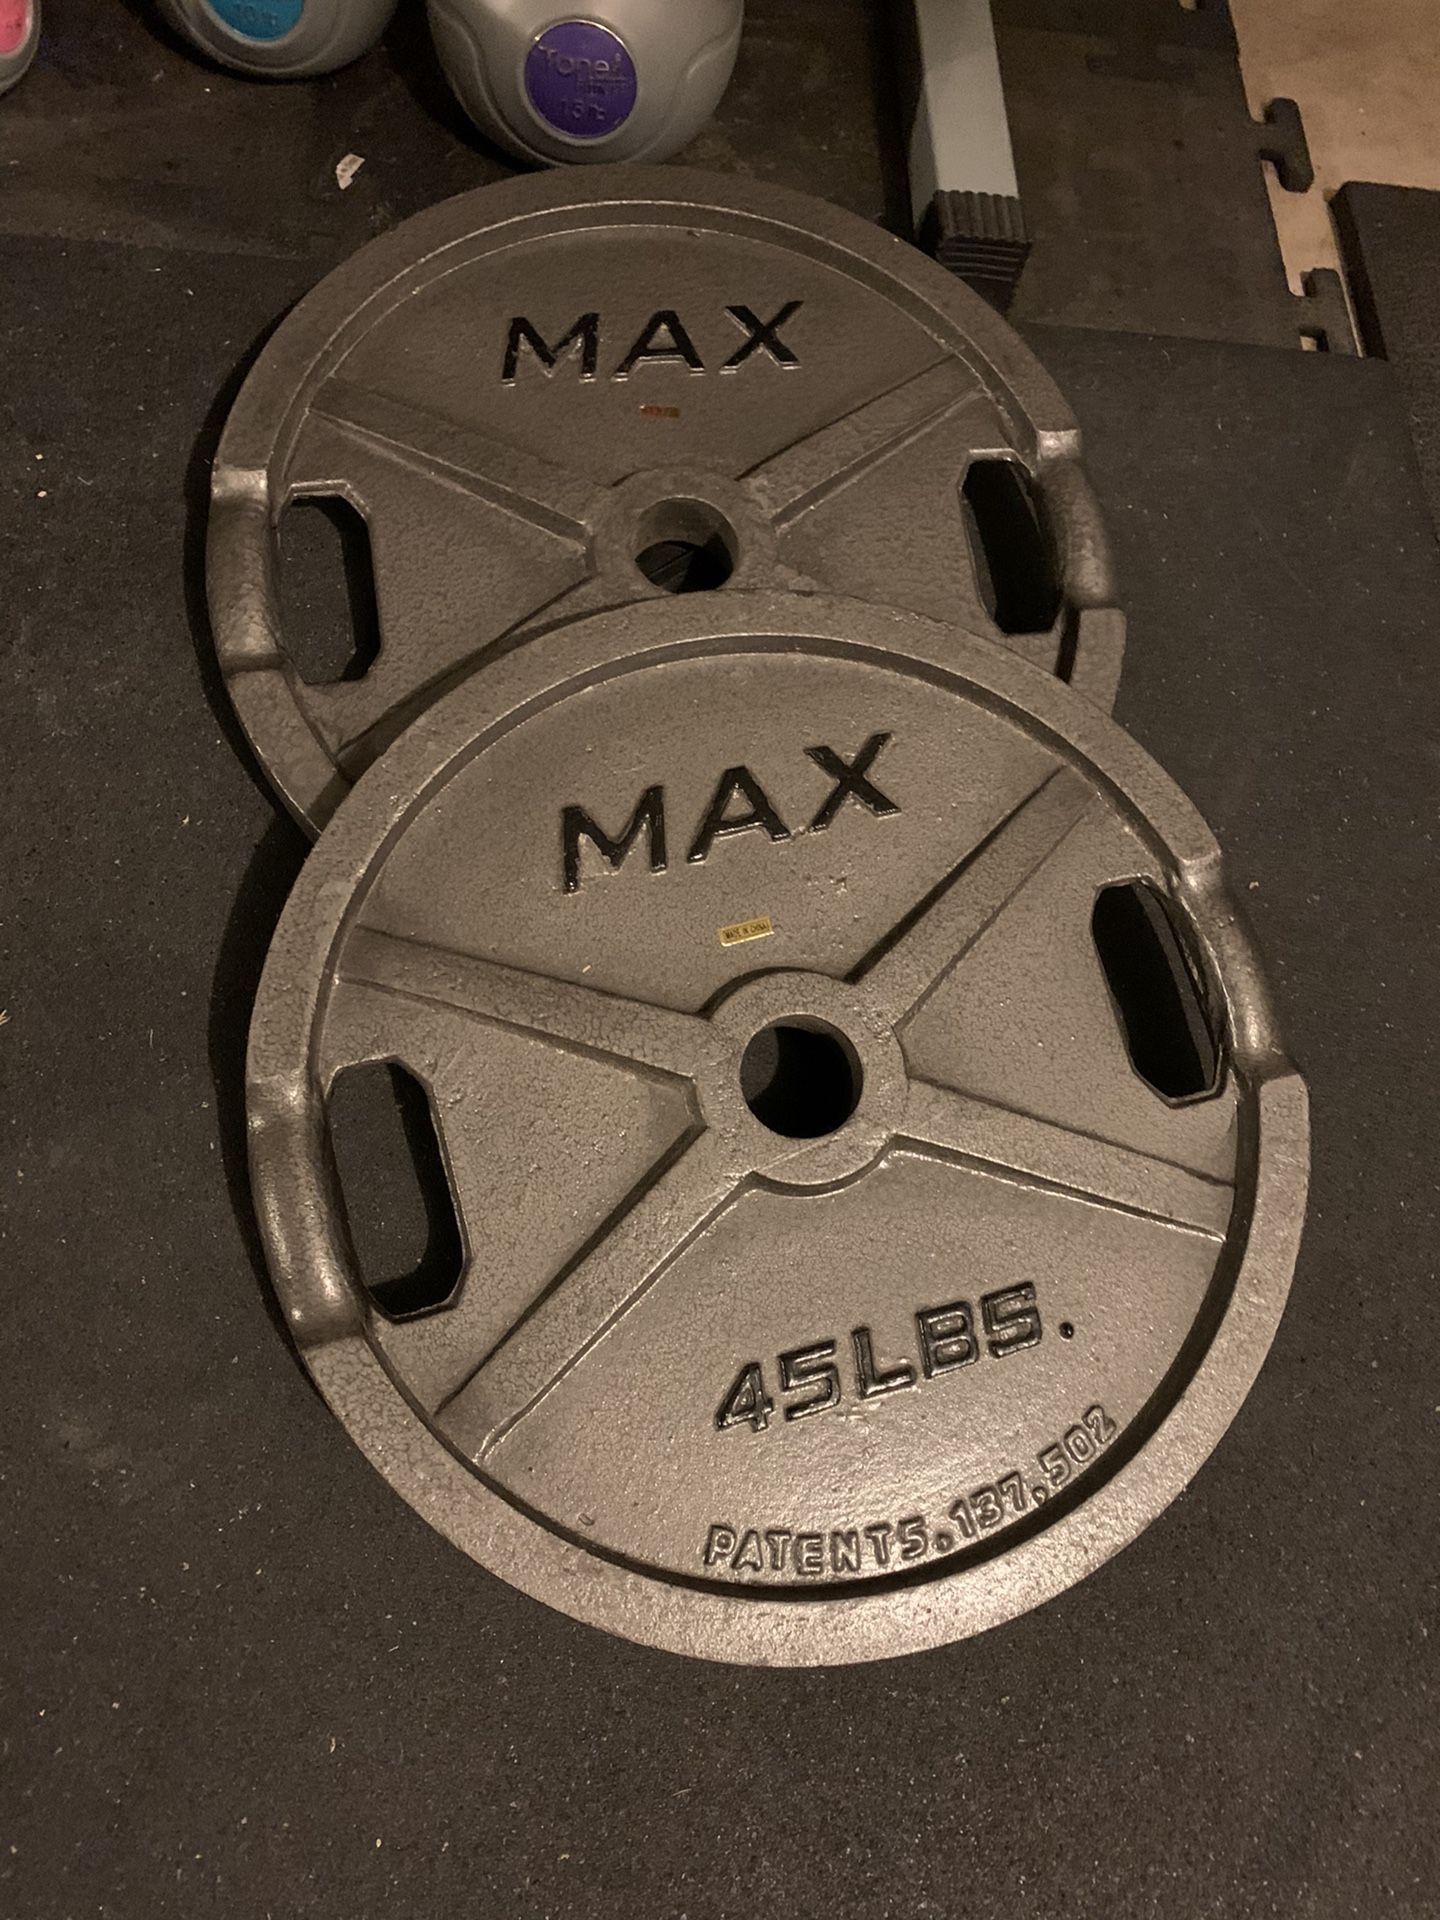 45 lb weights for weight bench